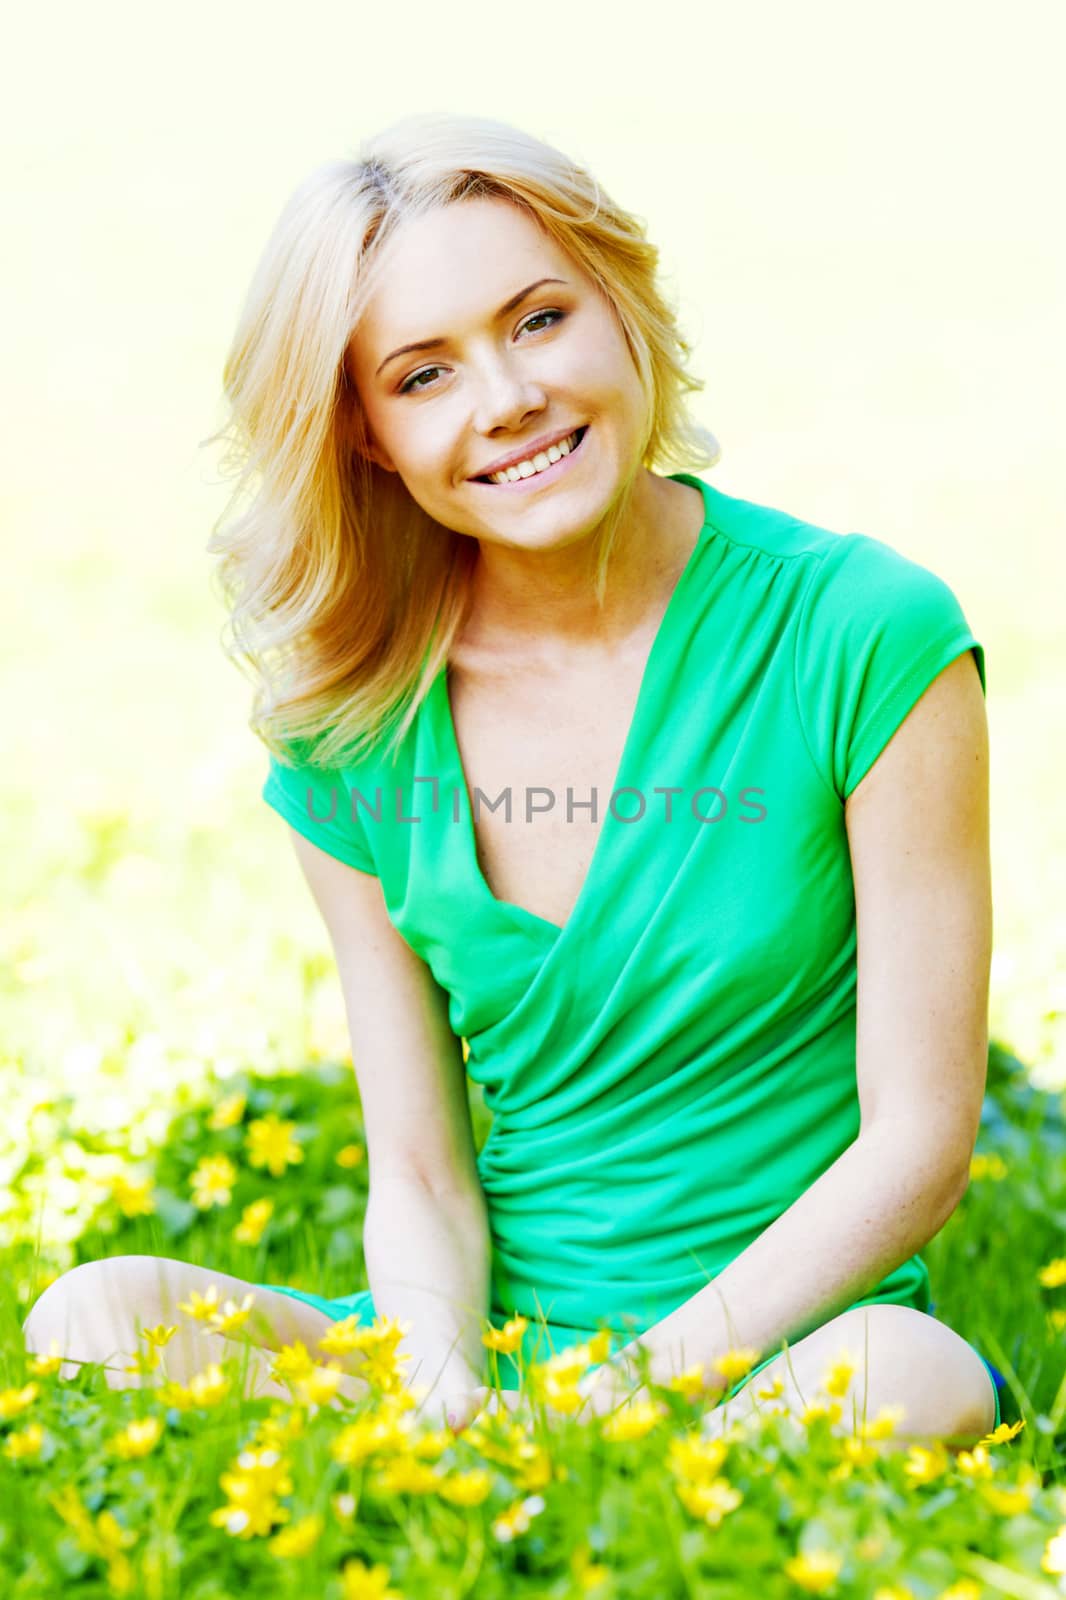 Beautiful young blond woman sitting on grass in park and enjoyng flowers